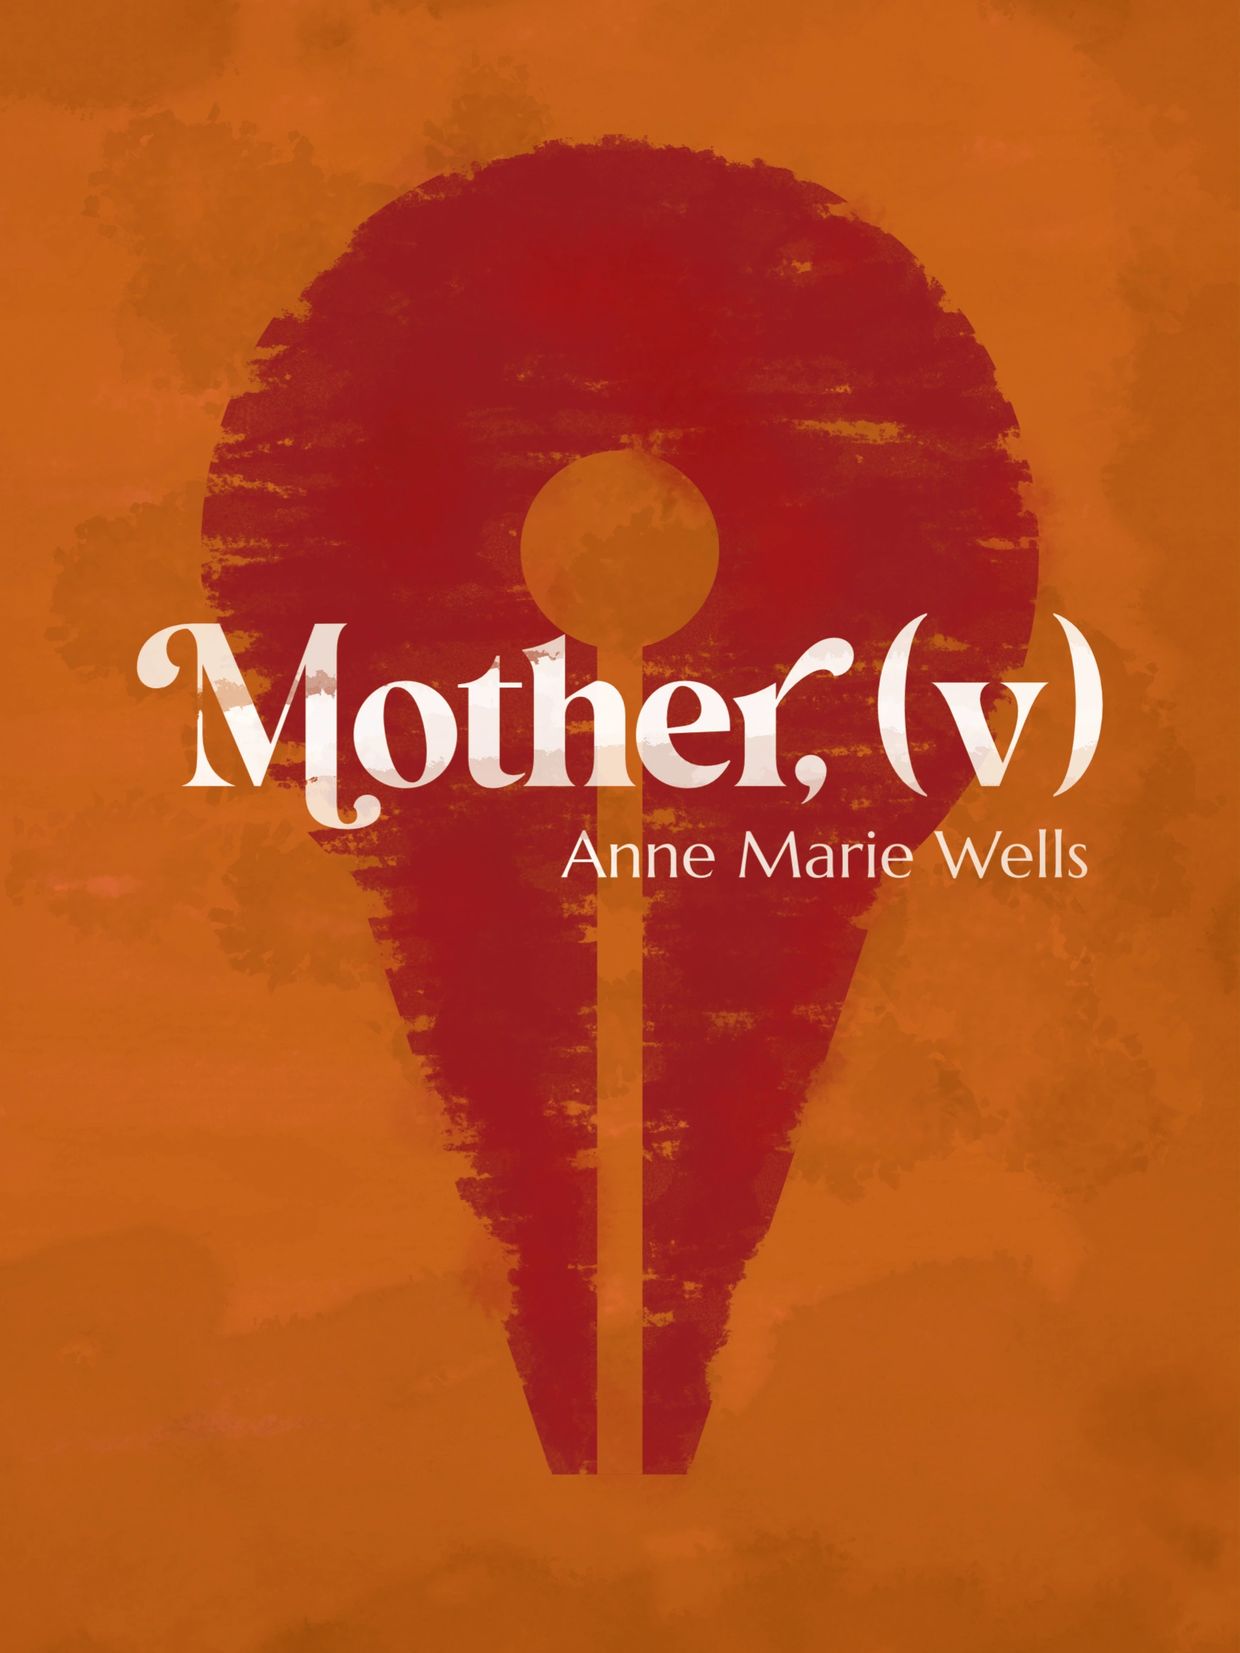 Poet Anne Marie Wells book cover for collection Mother, (verb)